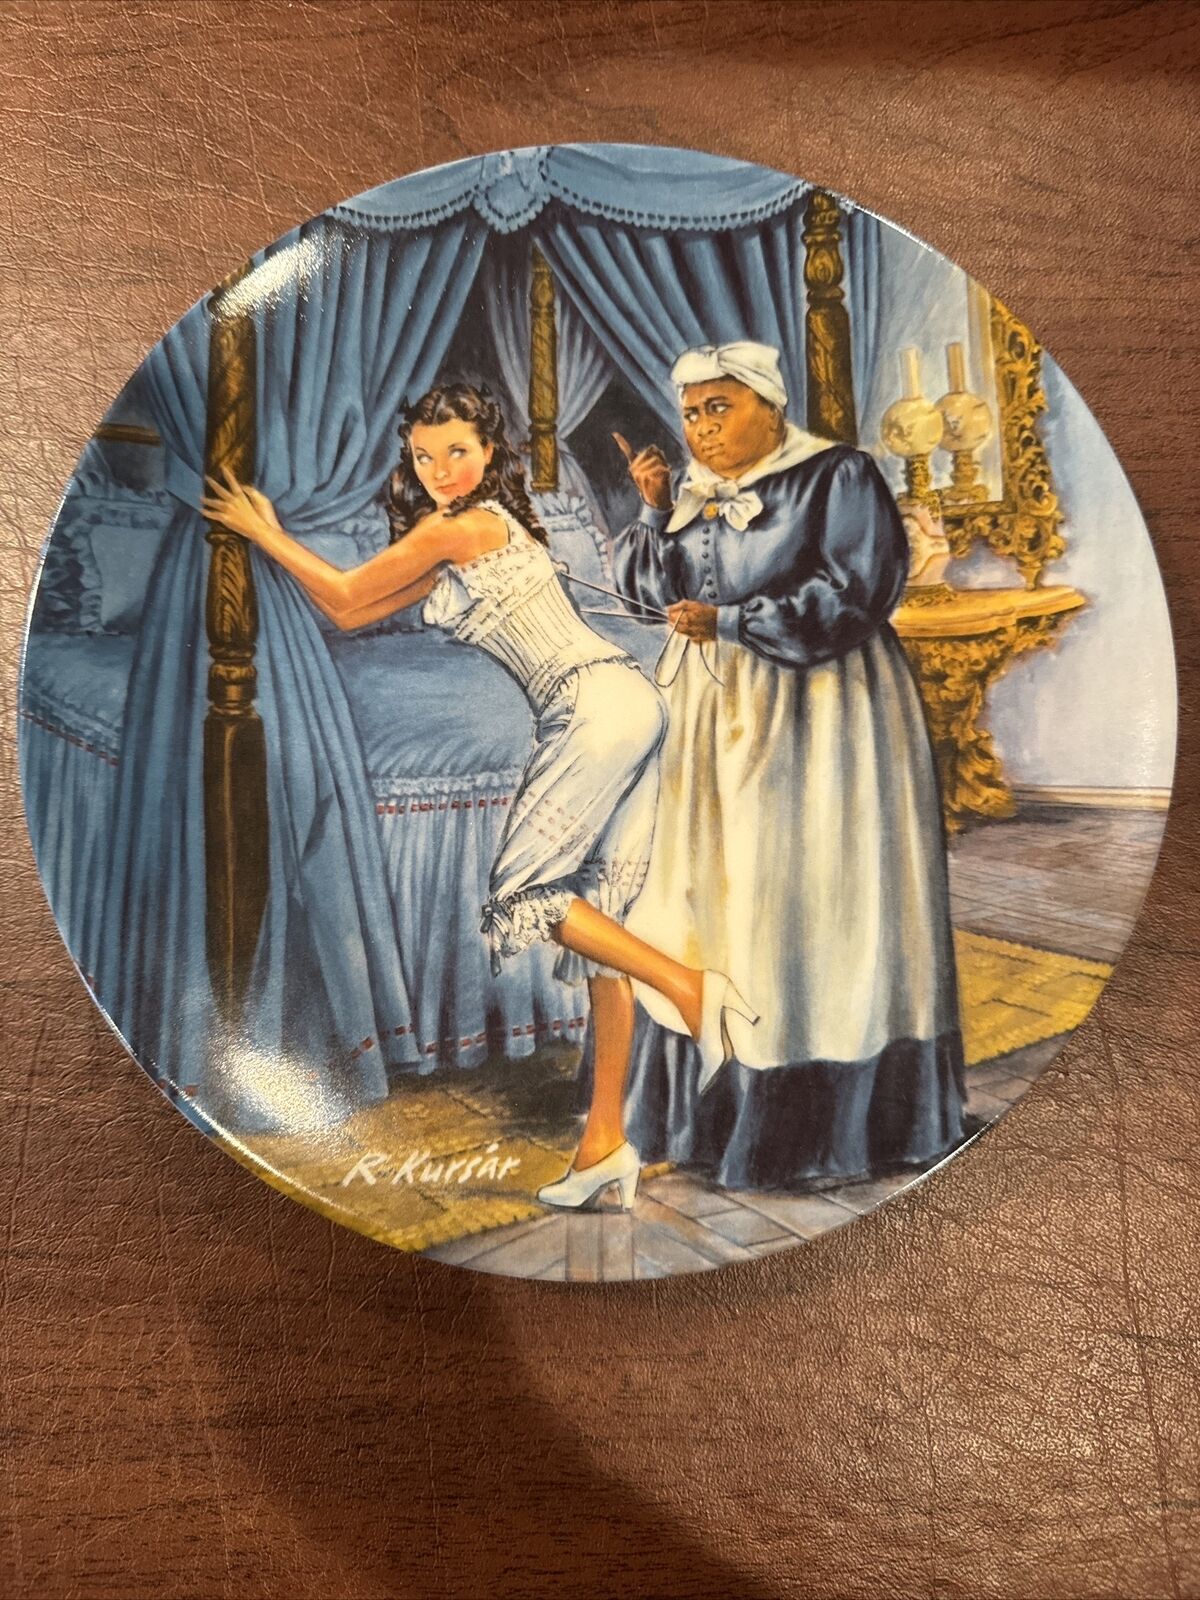 Knowles Gone With The Wind “Lacing Scarlett” Plate #6871